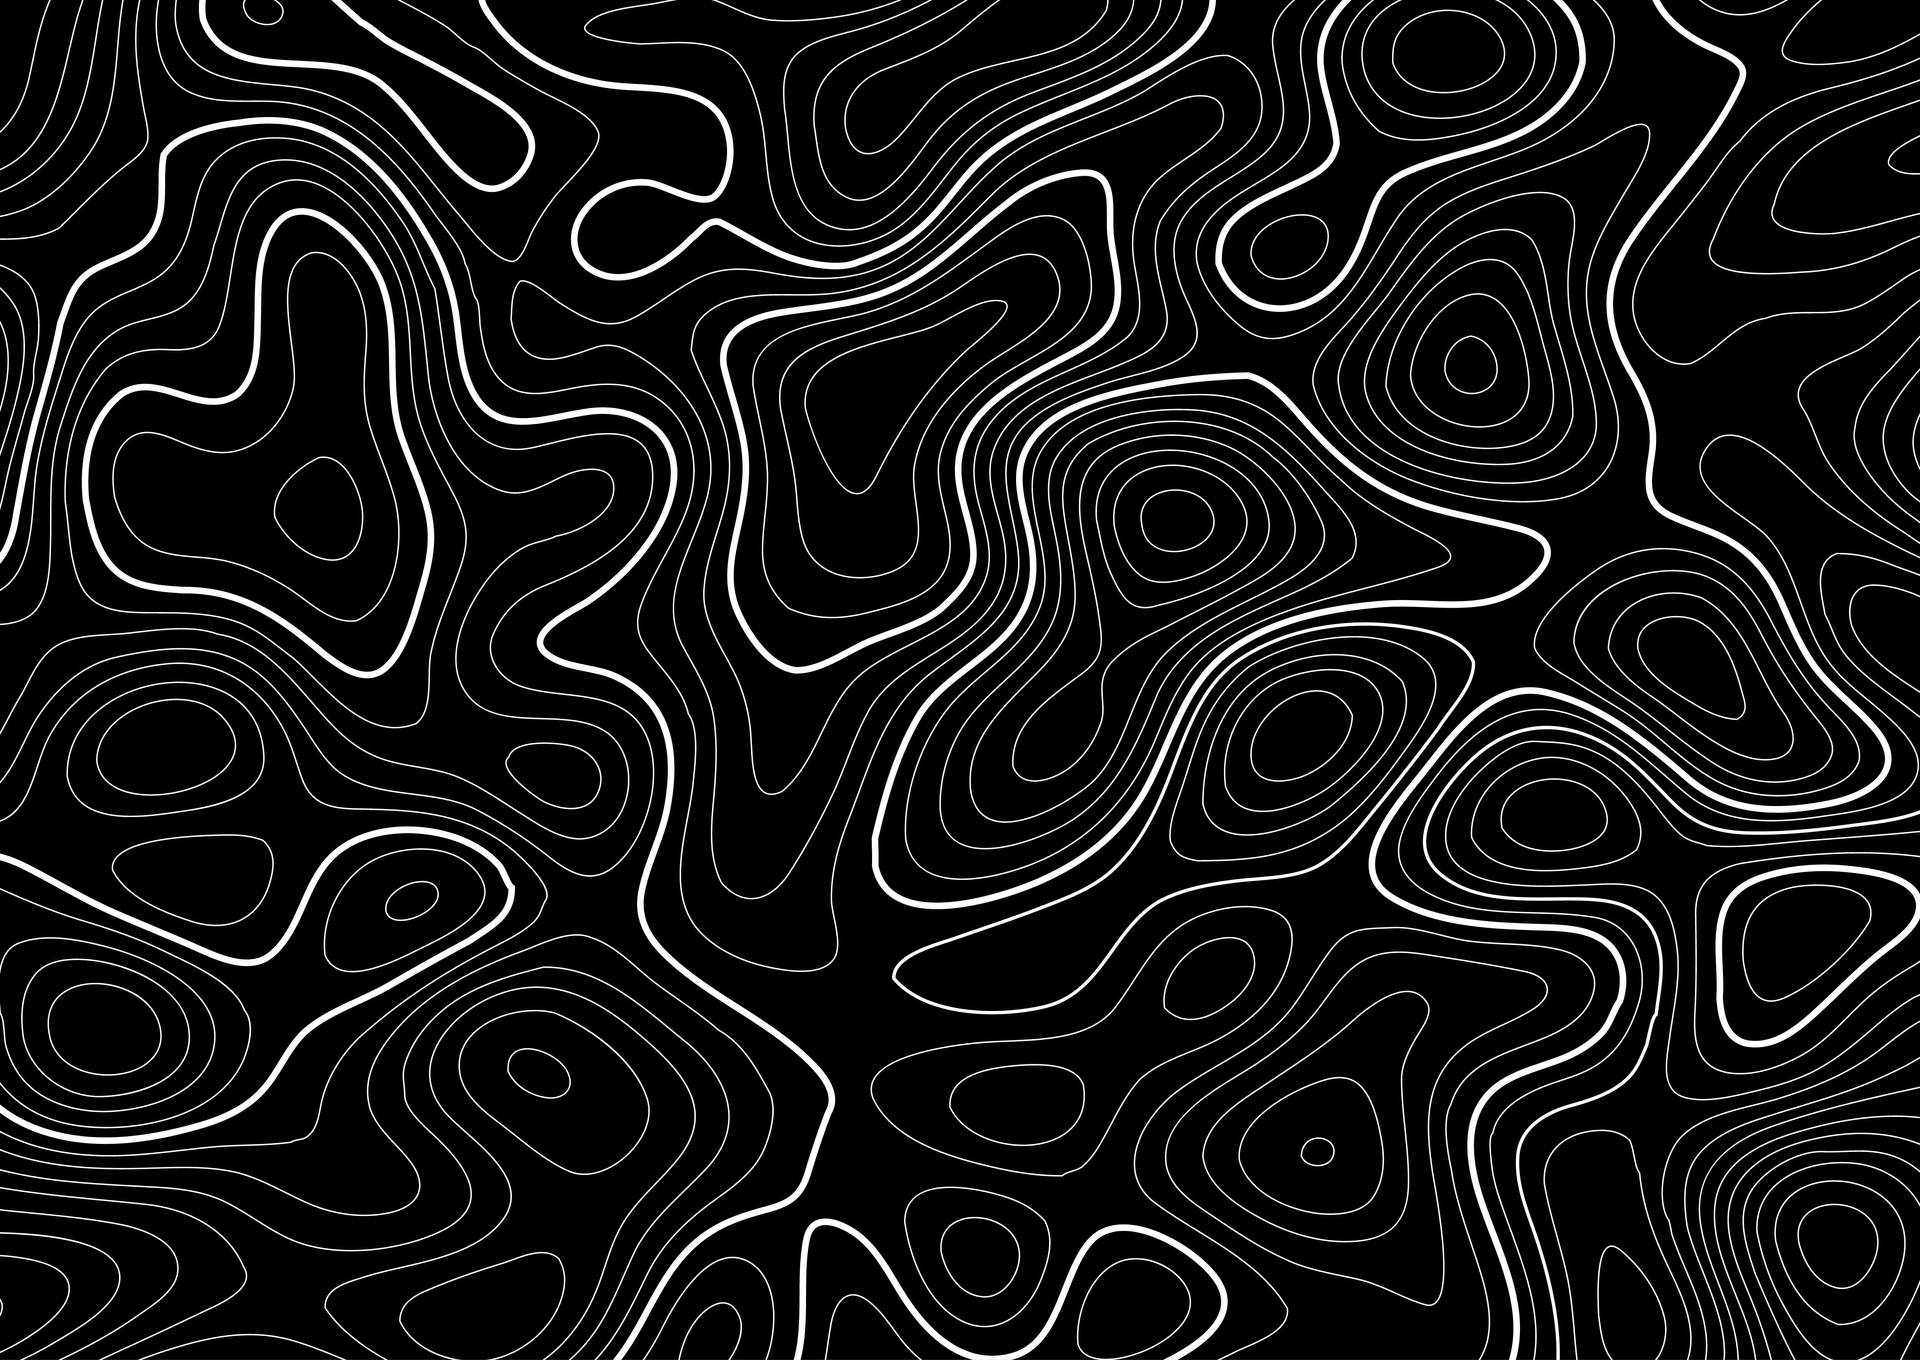 Topography Black And White Userstyles Org